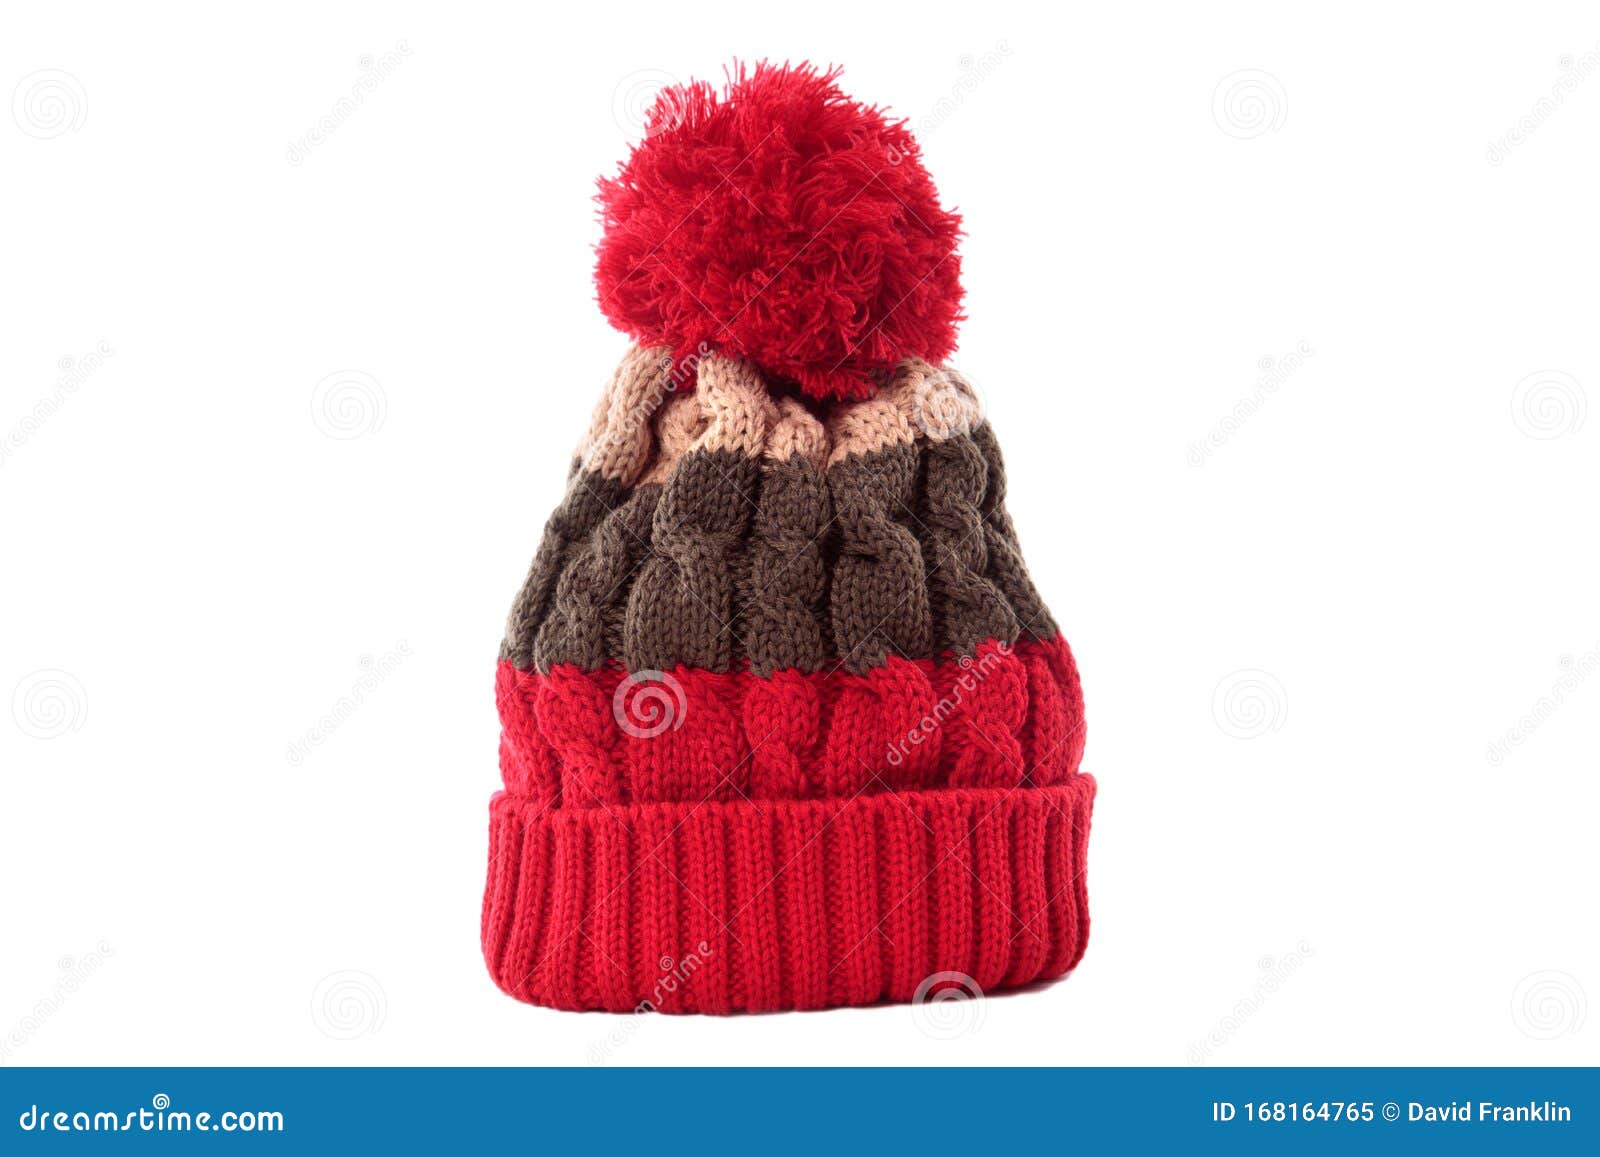 Red Winter Knit Ski Hat Isolated White Stock Image - Image of ...